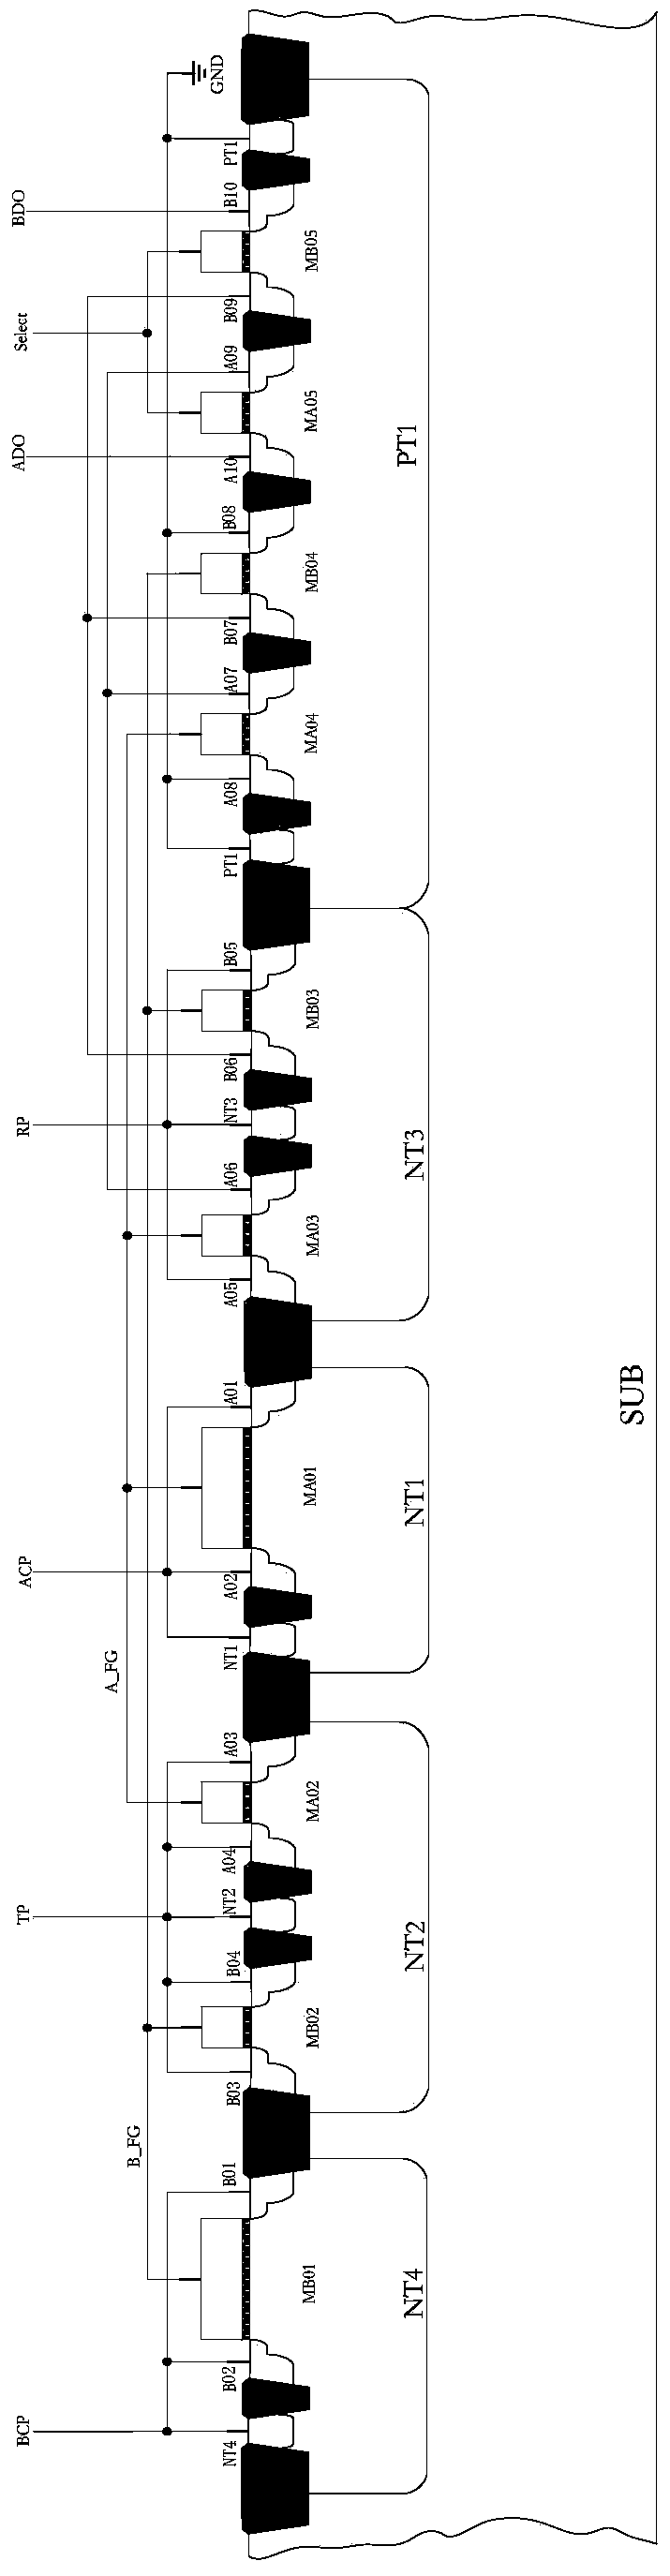 Ultralow power consumption differential structure nonvolatile memory compatible with standard CMOS (Complementary Metal-Oxide-Semiconductor Transistor) process